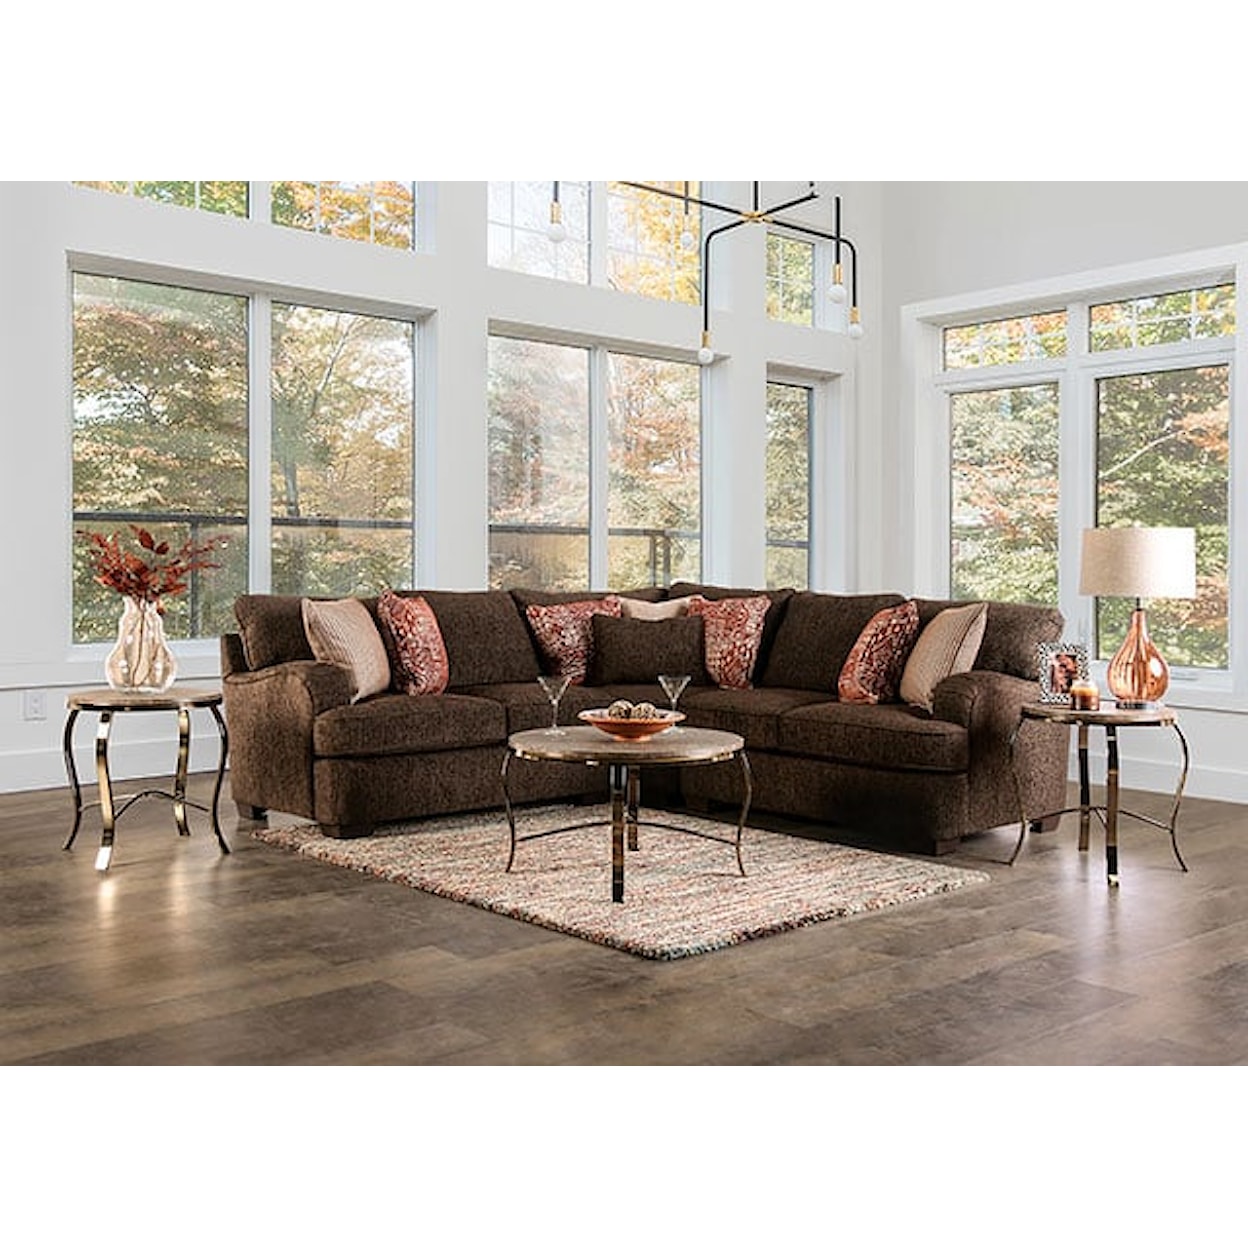 Furniture of America Wanstead 3-Piece Sectional Sofa